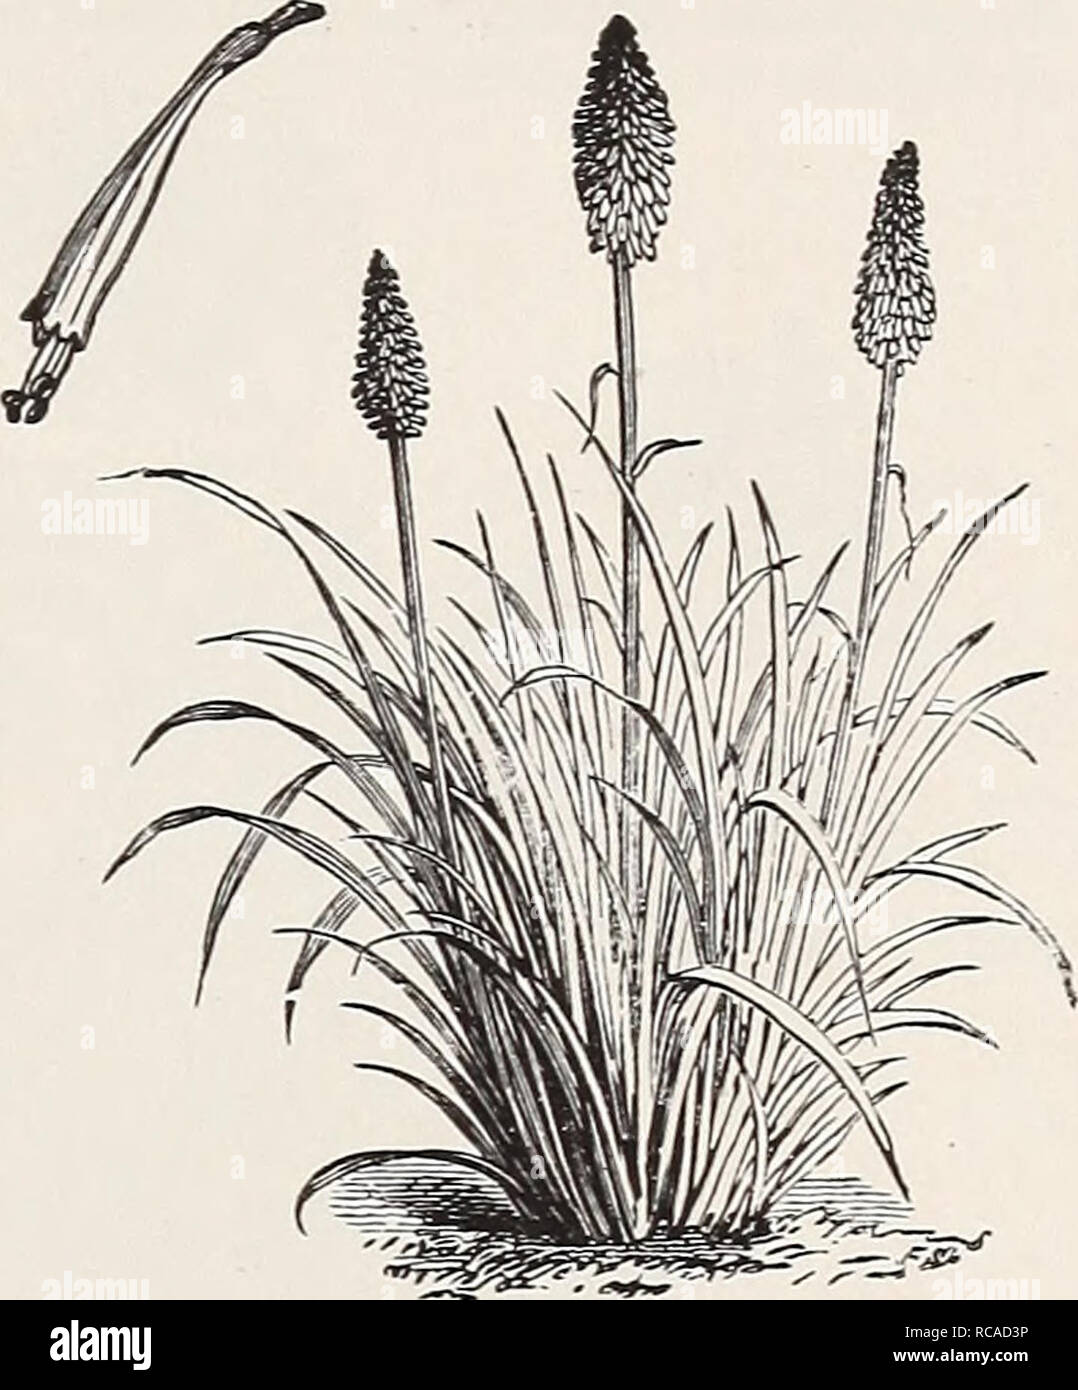 . Ellwanger &amp; Barry's general catalogue : Mount Hope nurseries. GENERAL CATALOGUE. 127 STATICE. Sea-lavender. S. alba. Large, compact, white flowers. 15 inches. July and August. 50c. S. grandiflora. Purplish flowers. 25c. S. latifolia. Broad, luxuriant foliage; large trusses of lilac flowers; very fine for bouquets when dried. July. 25c. S. maritima. Sea-Pink, or Thrift. Rosy lilac; one of the best for edging; 6 inches. June and July. 25c. S. undulata. Wavy-leaved; large trusses of pale lilac flowers; 10 inches. August and September. 30c. SYMPHYTUM. Comfrey. S. asperrimum. A tall, vigorous Stock Photo